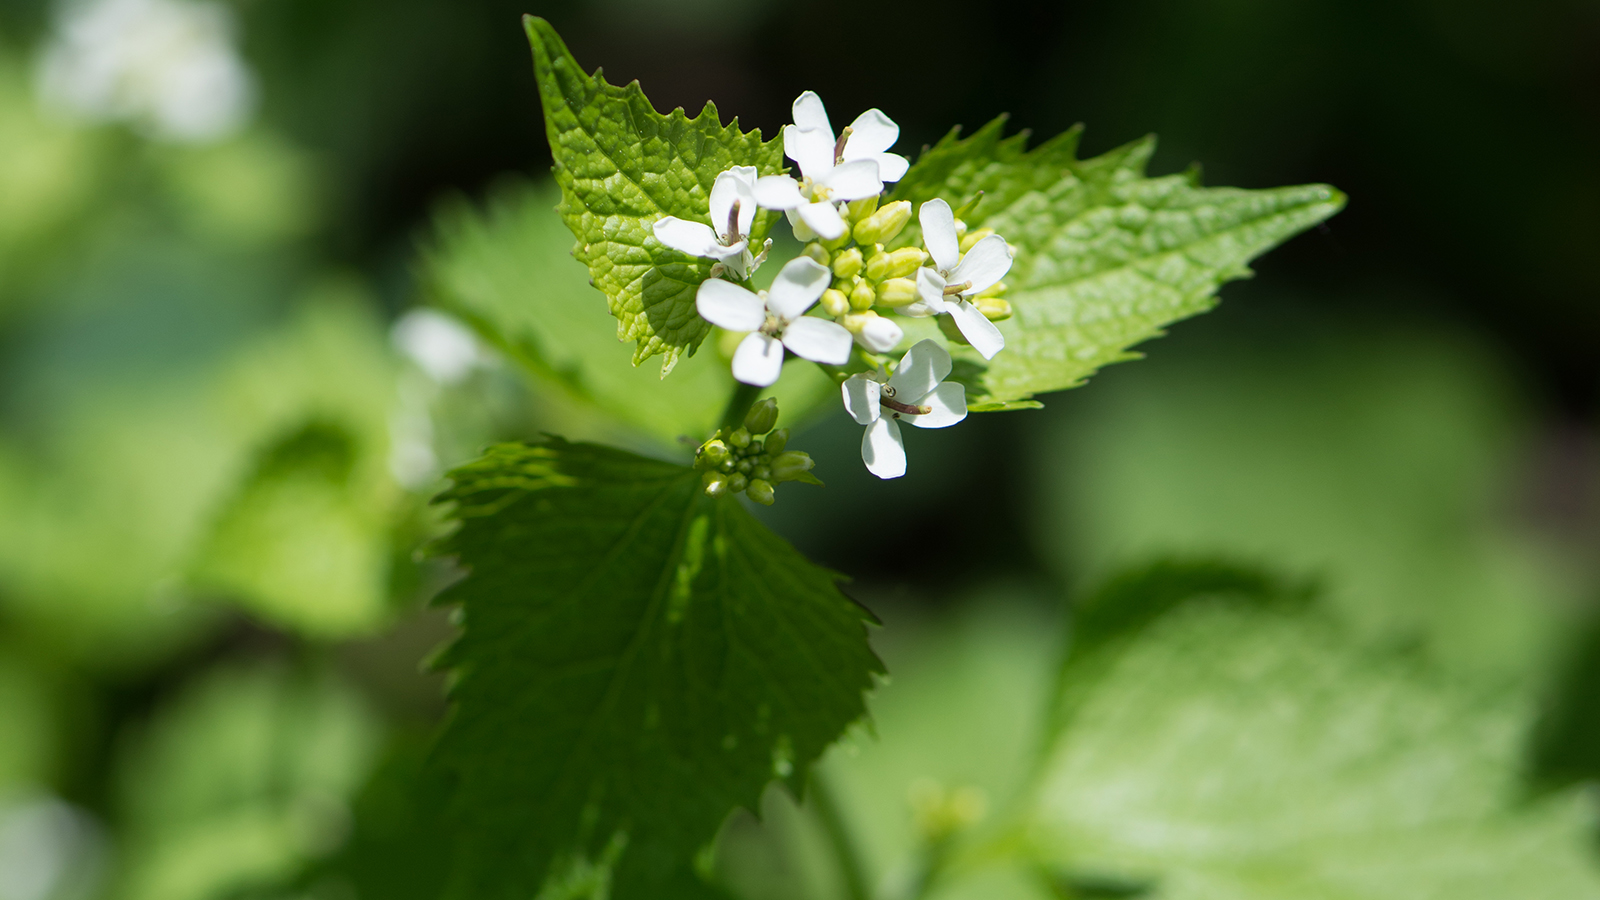 Garlic mustard, with tear-drop shaped serrated leaves and small white flowers.